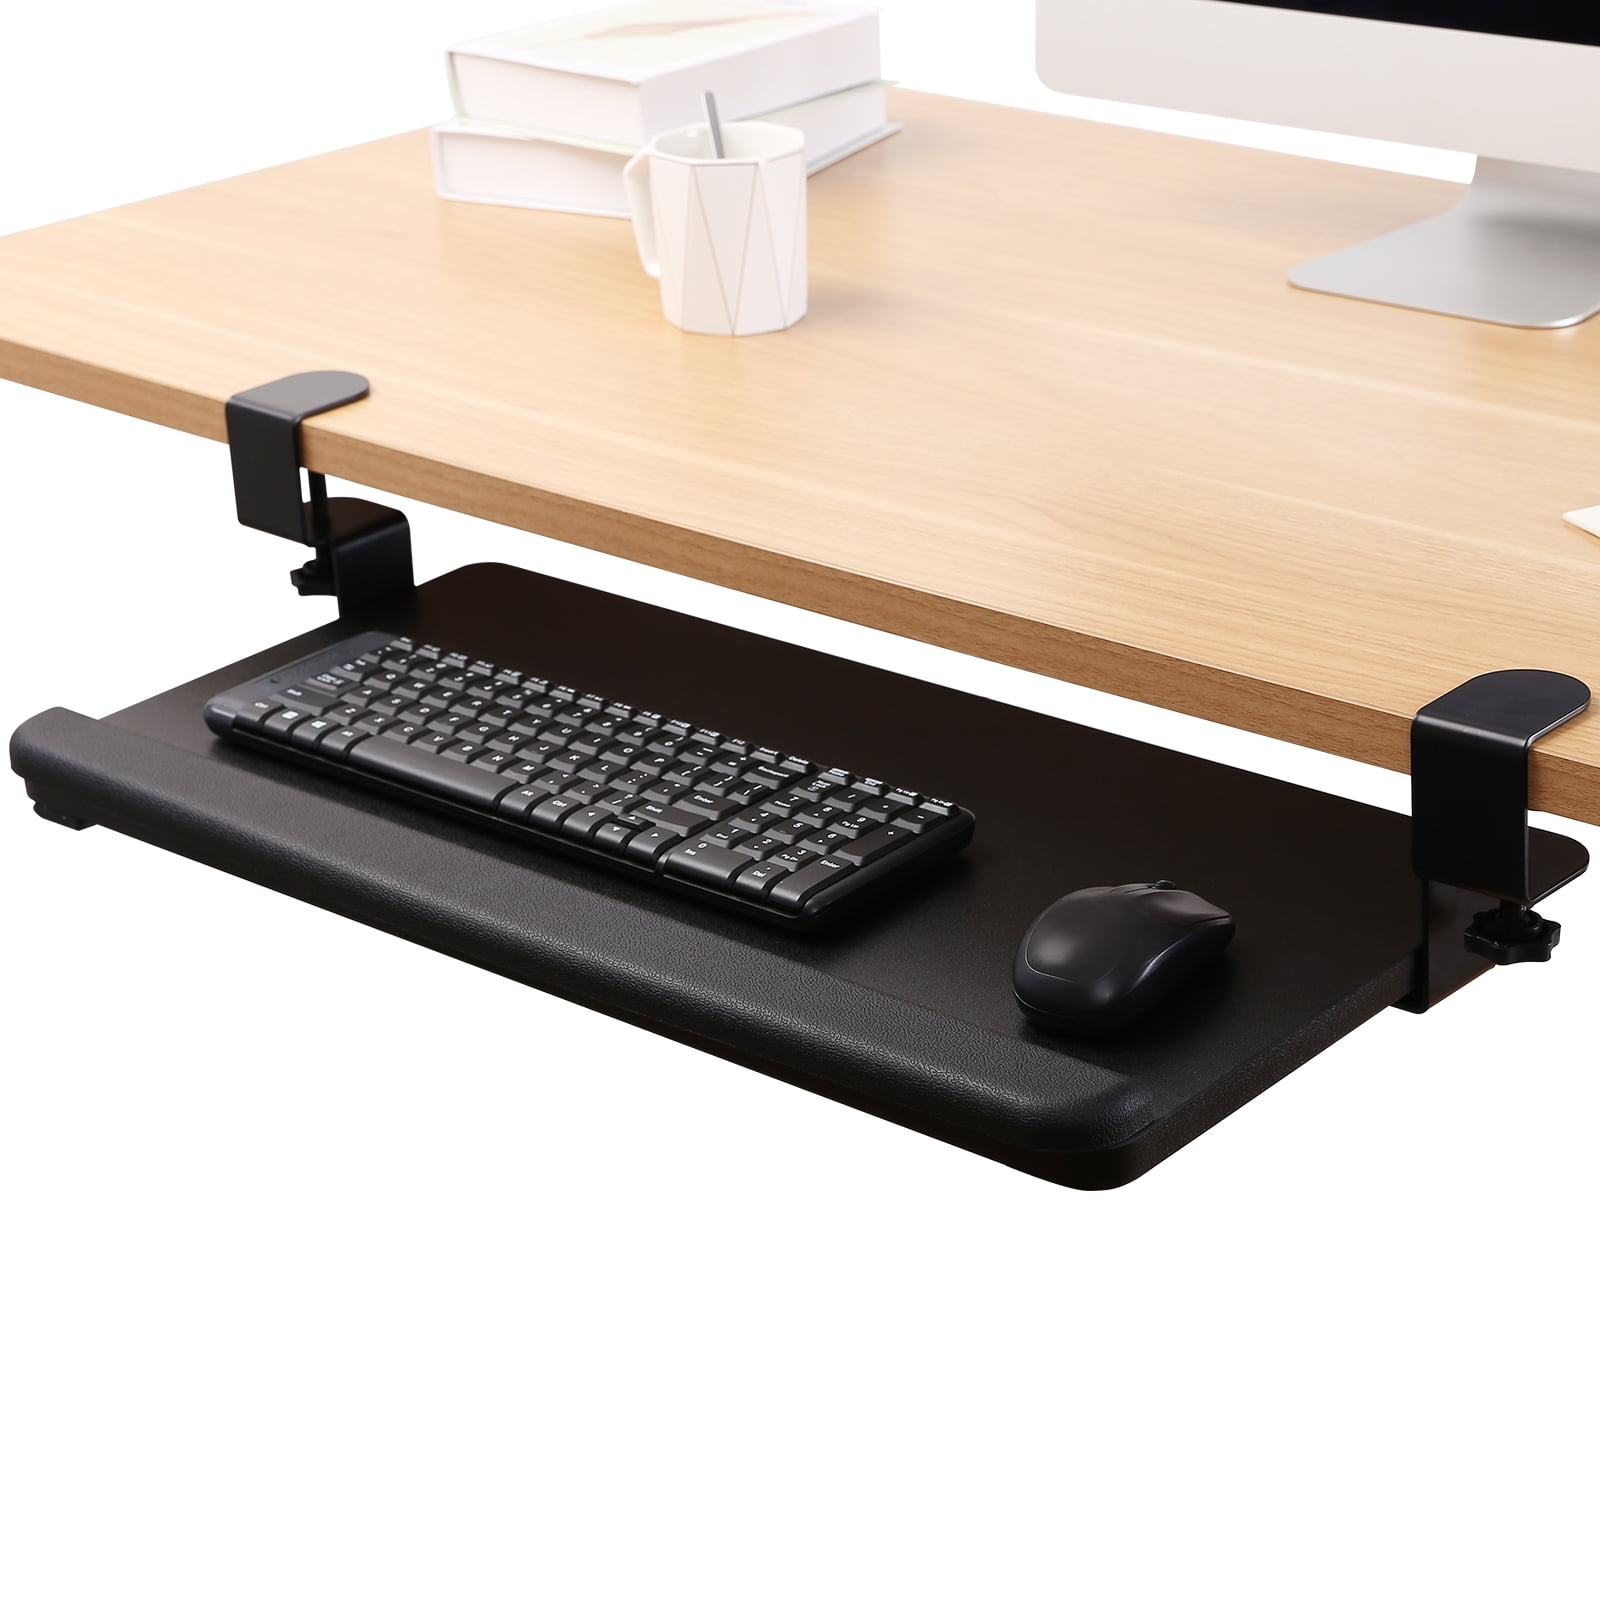 MYOYAY Keyboard Clamp Tray 25" x 9.5" Adjustable Pull Out Computer Drawer with 